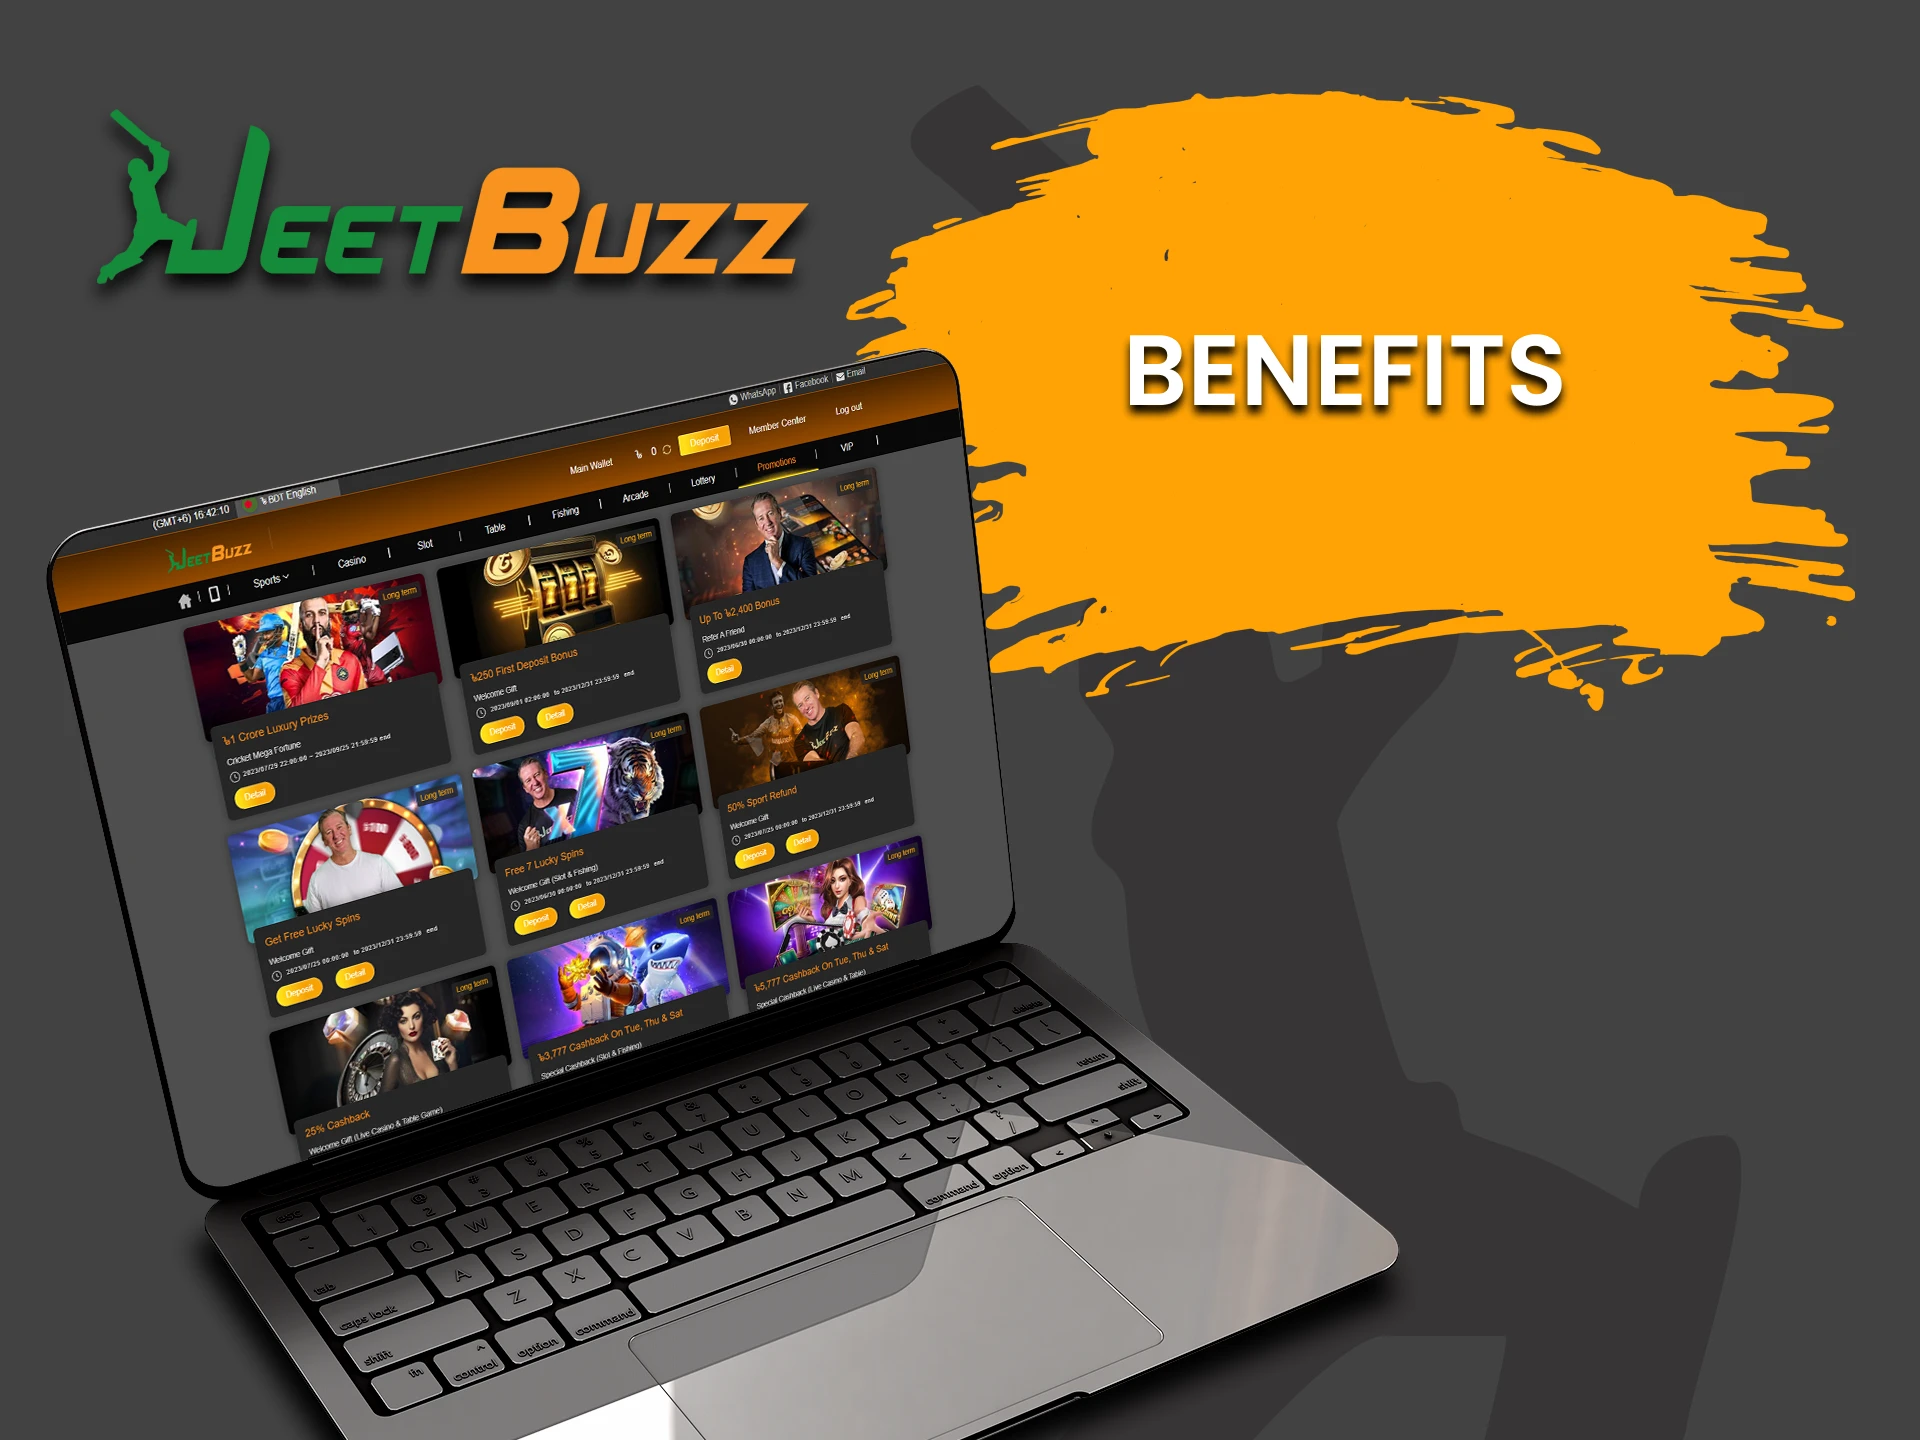 Find out about the benefits of JeetBuzz for playing Poker.